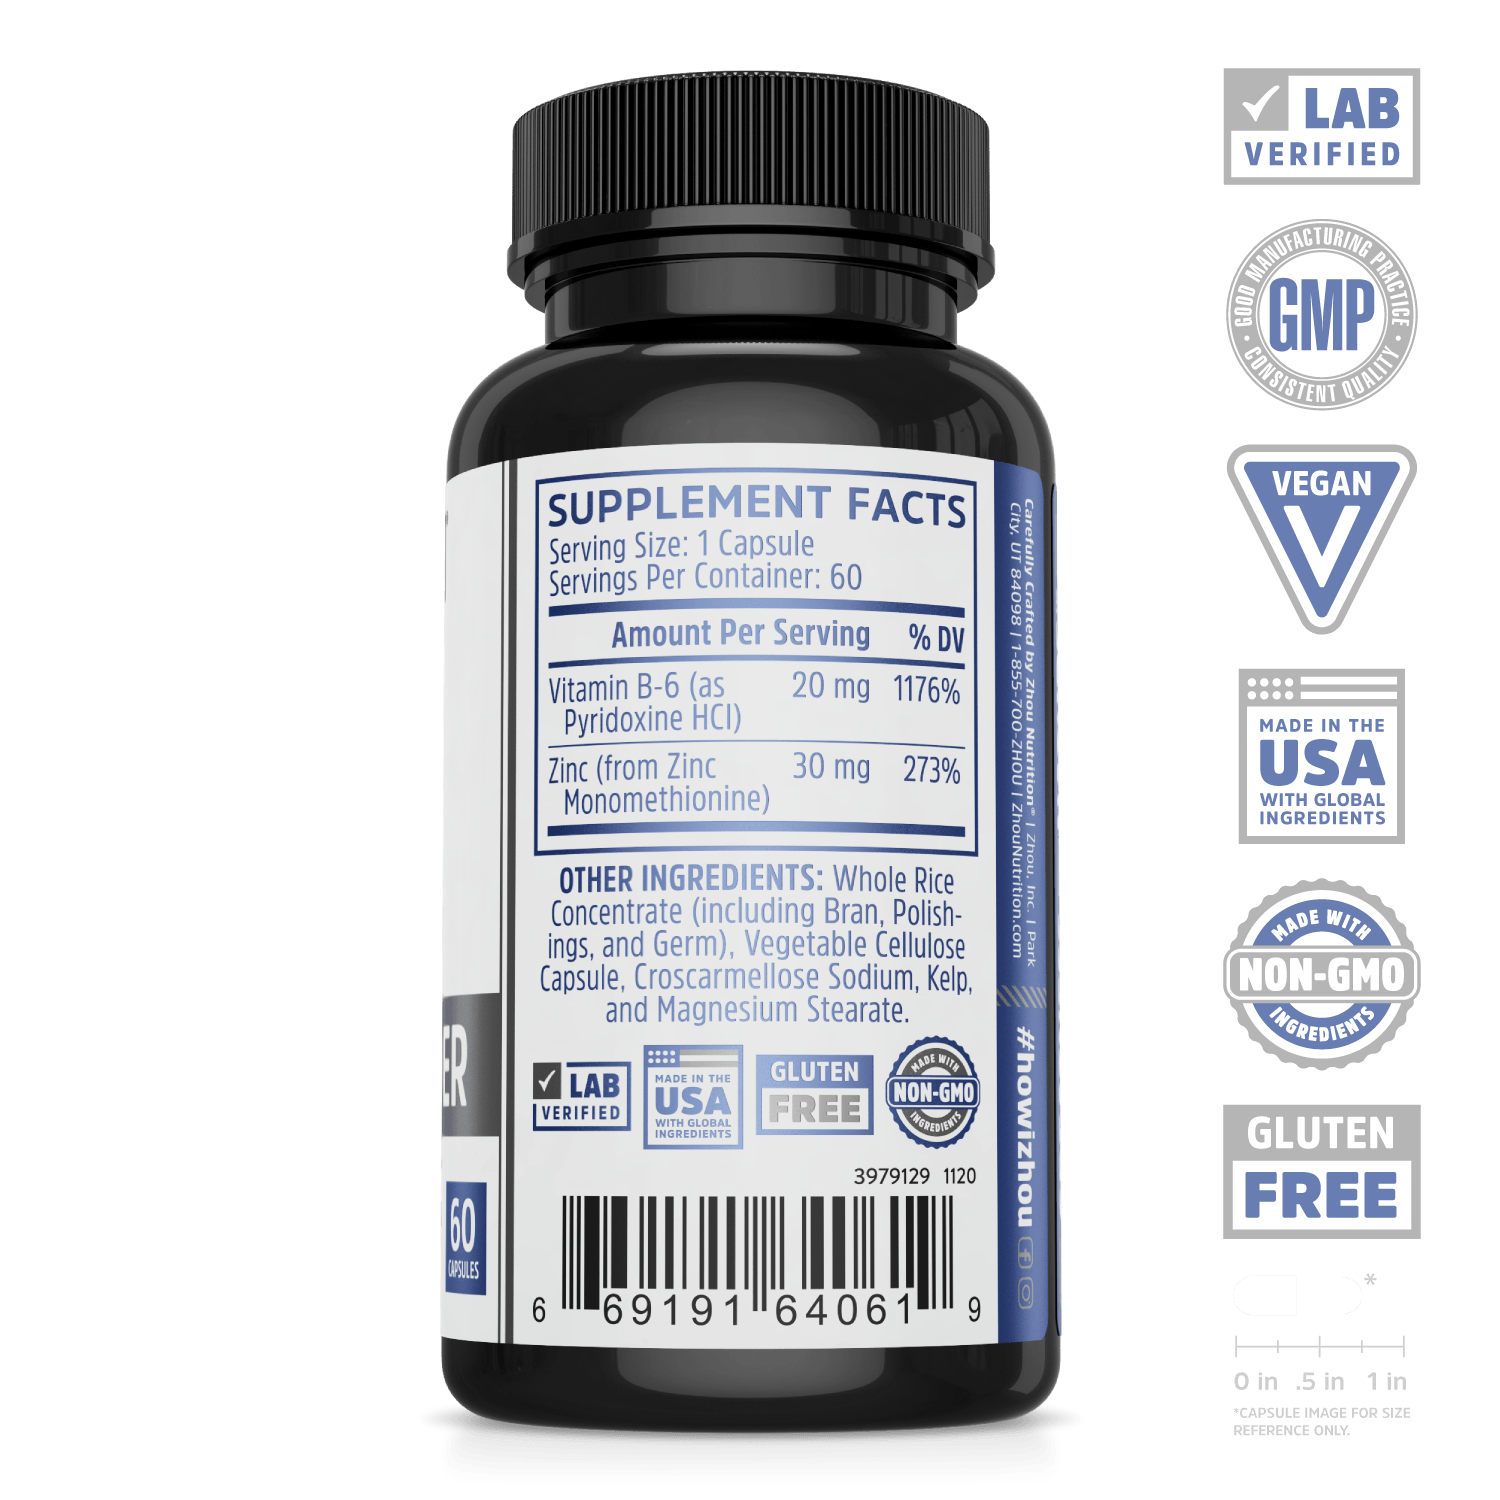 Zinc Defender supplement from zhou nutrition. Lab verified, GMP, vegan, made in the USA with global ingredients, made with non-GMO ingredients, gluten free.